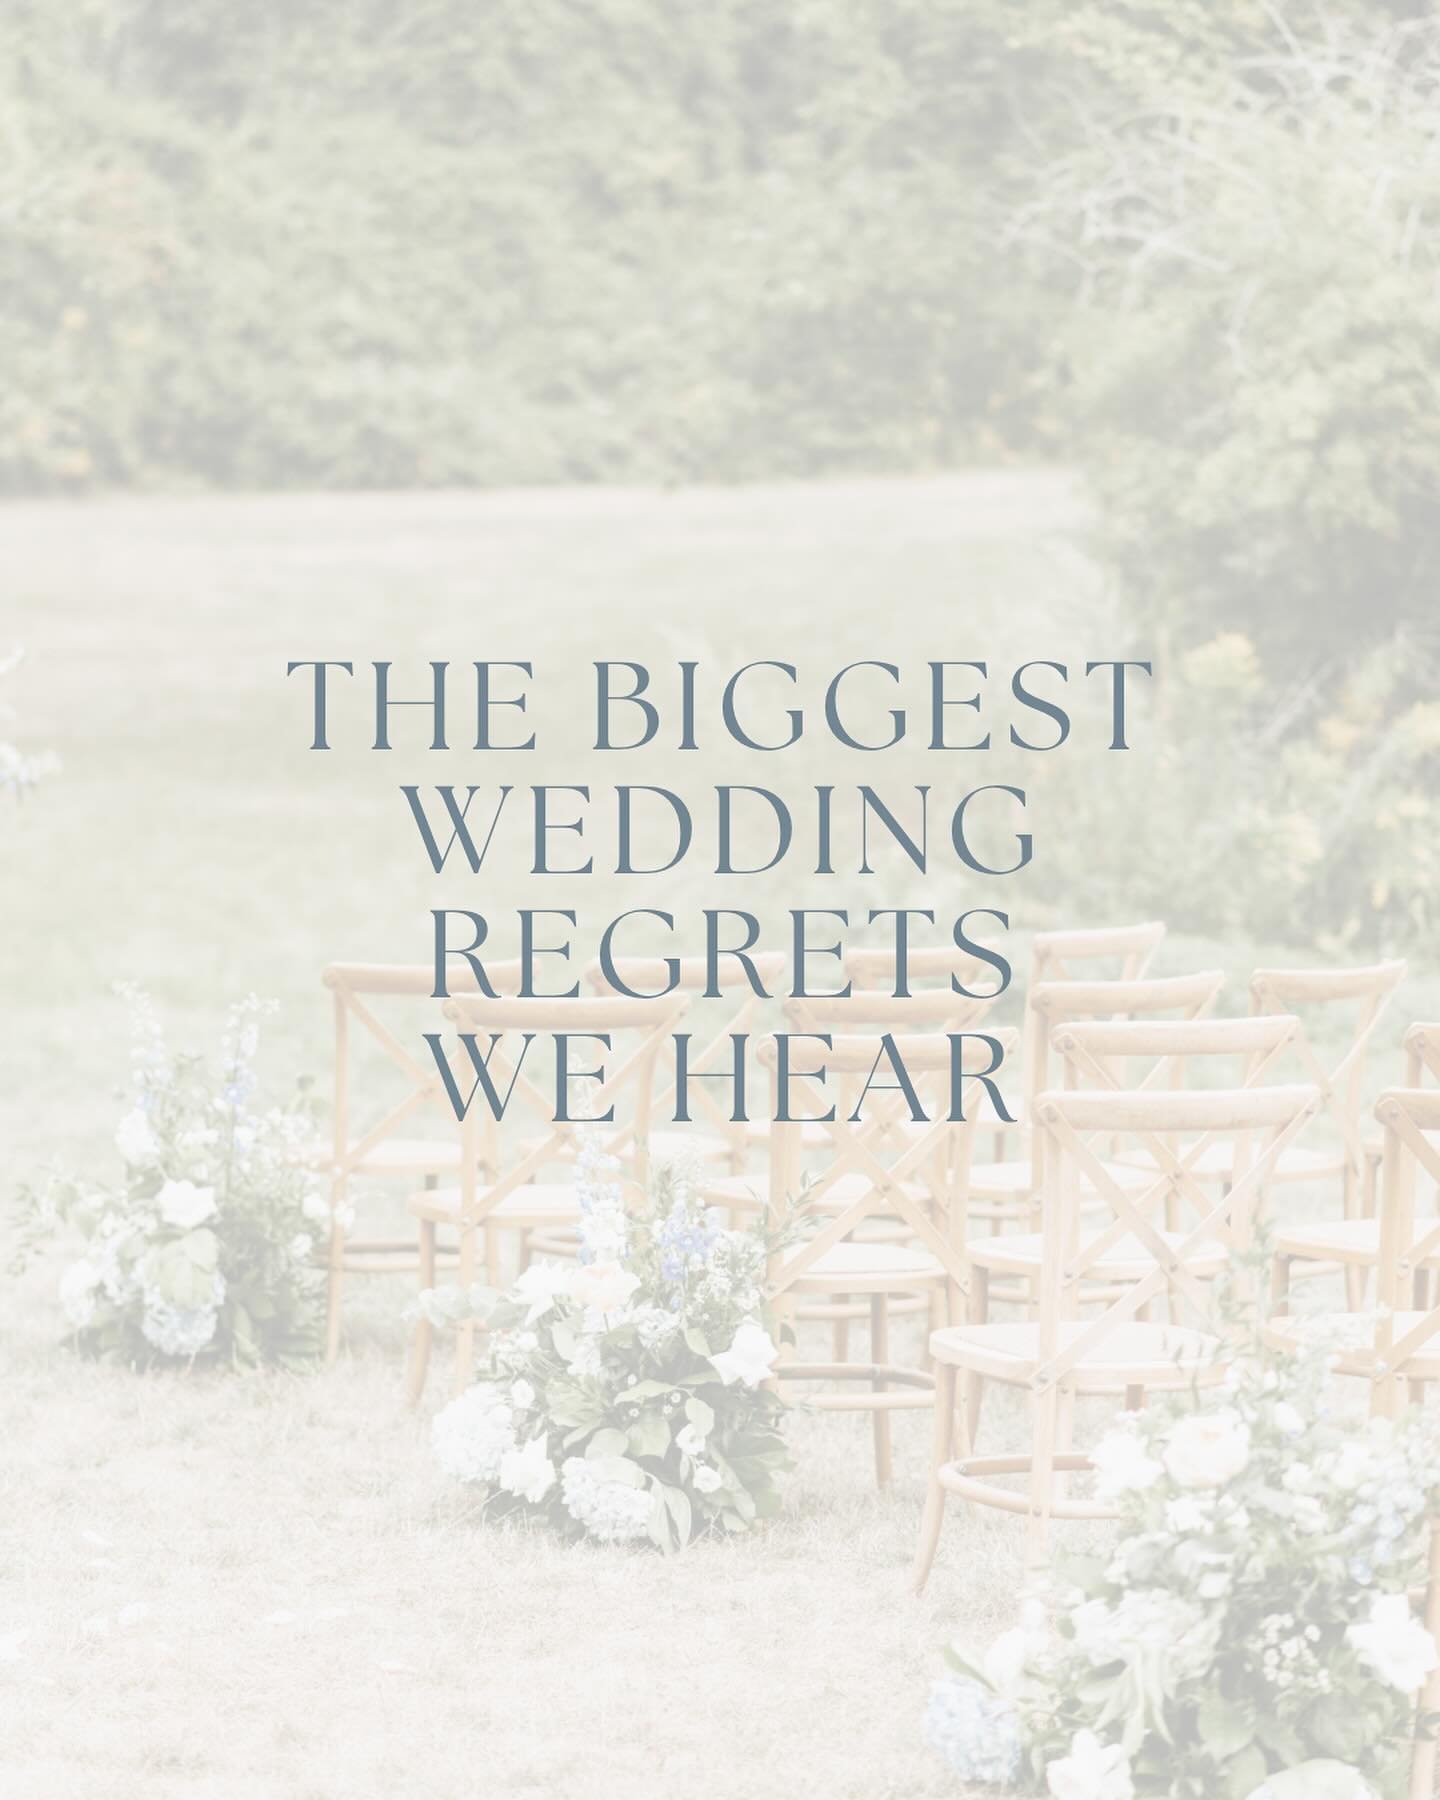 Sharing today the biggest regrets we&rsquo;ve heard from brides and grooms over the last 10 years: 

1. Cheap Photography

2. No Videography

3. No Makeup/Hair Trial

4. Not Reading Reviews

5. Inviting Too Many 

6. Not Eating Enough

Scroll through